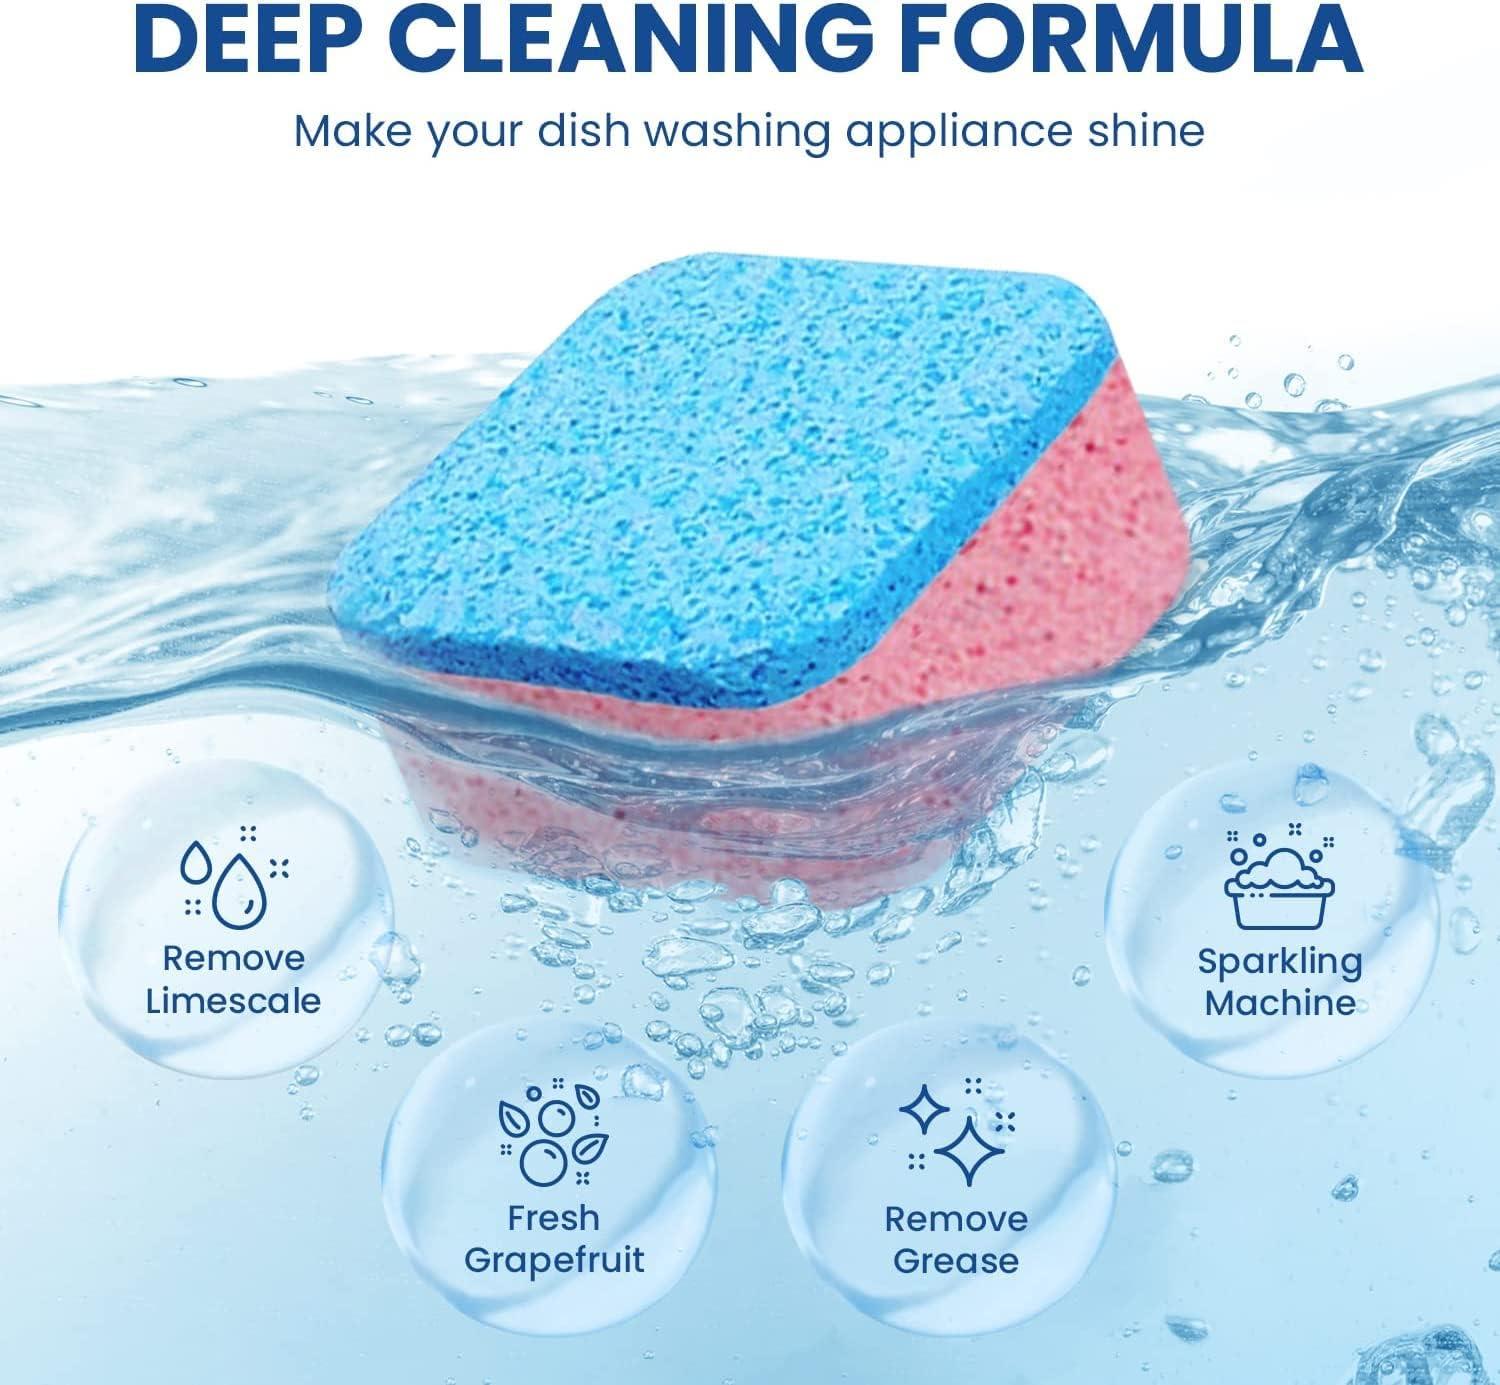 Washing Machine Cleaner Descaler 24Pcs - Deep Cleaning Tablets For